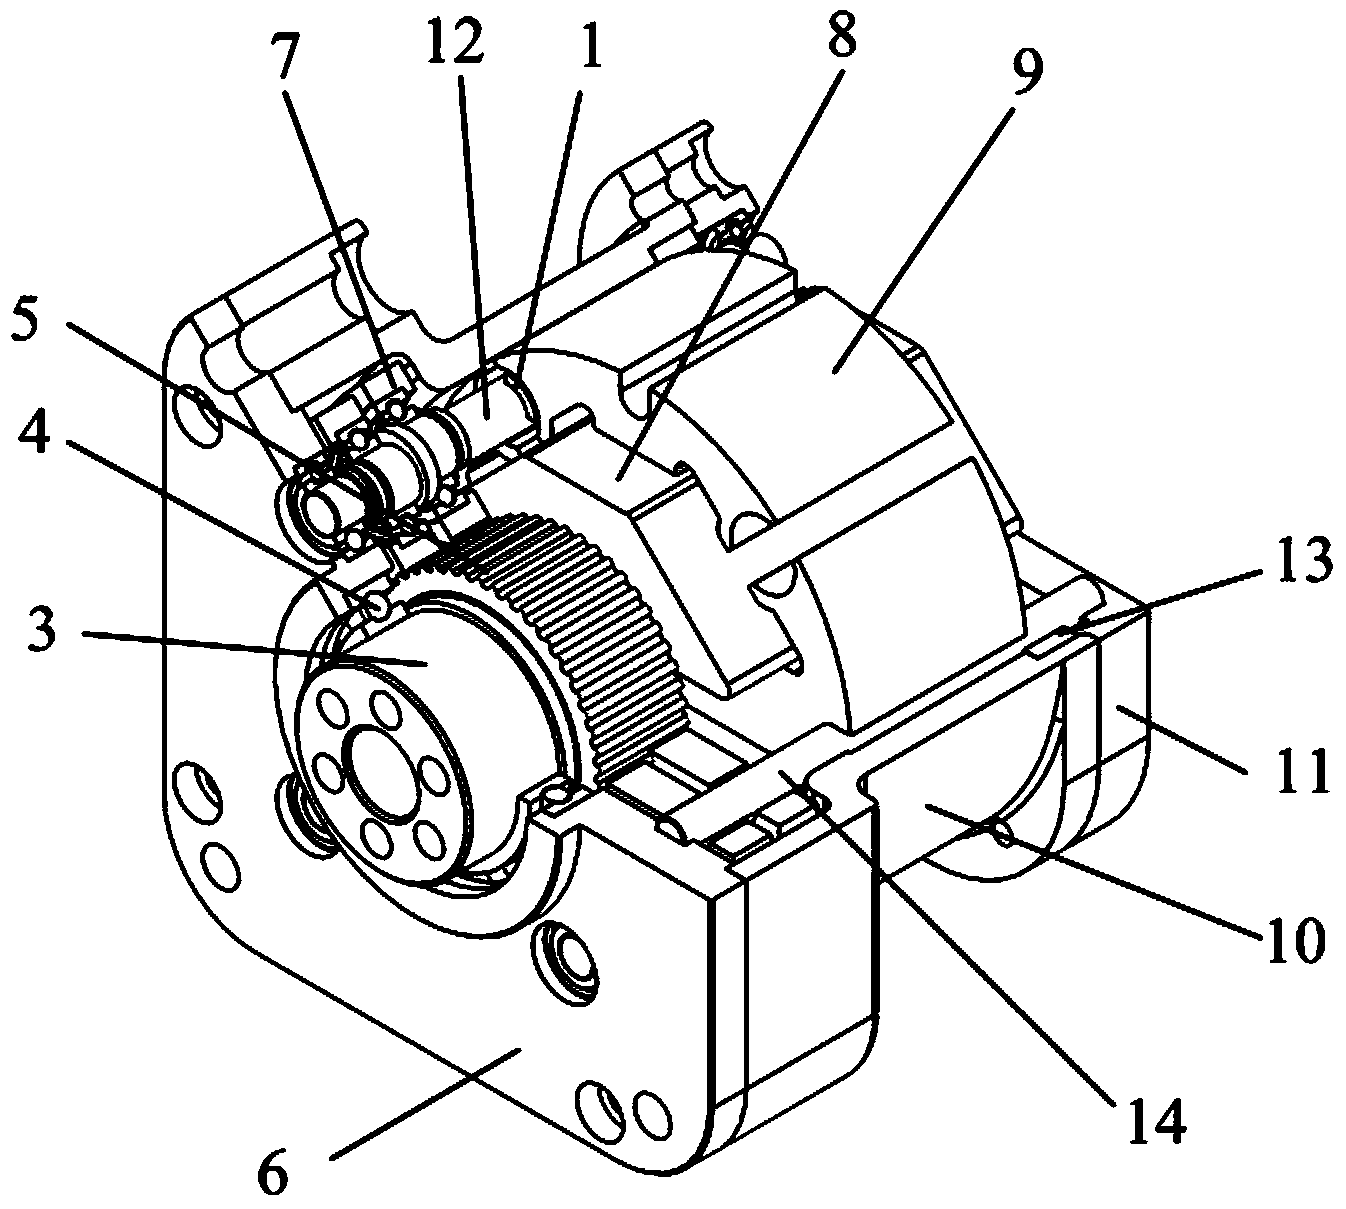 Four-rotor driving type geared motor